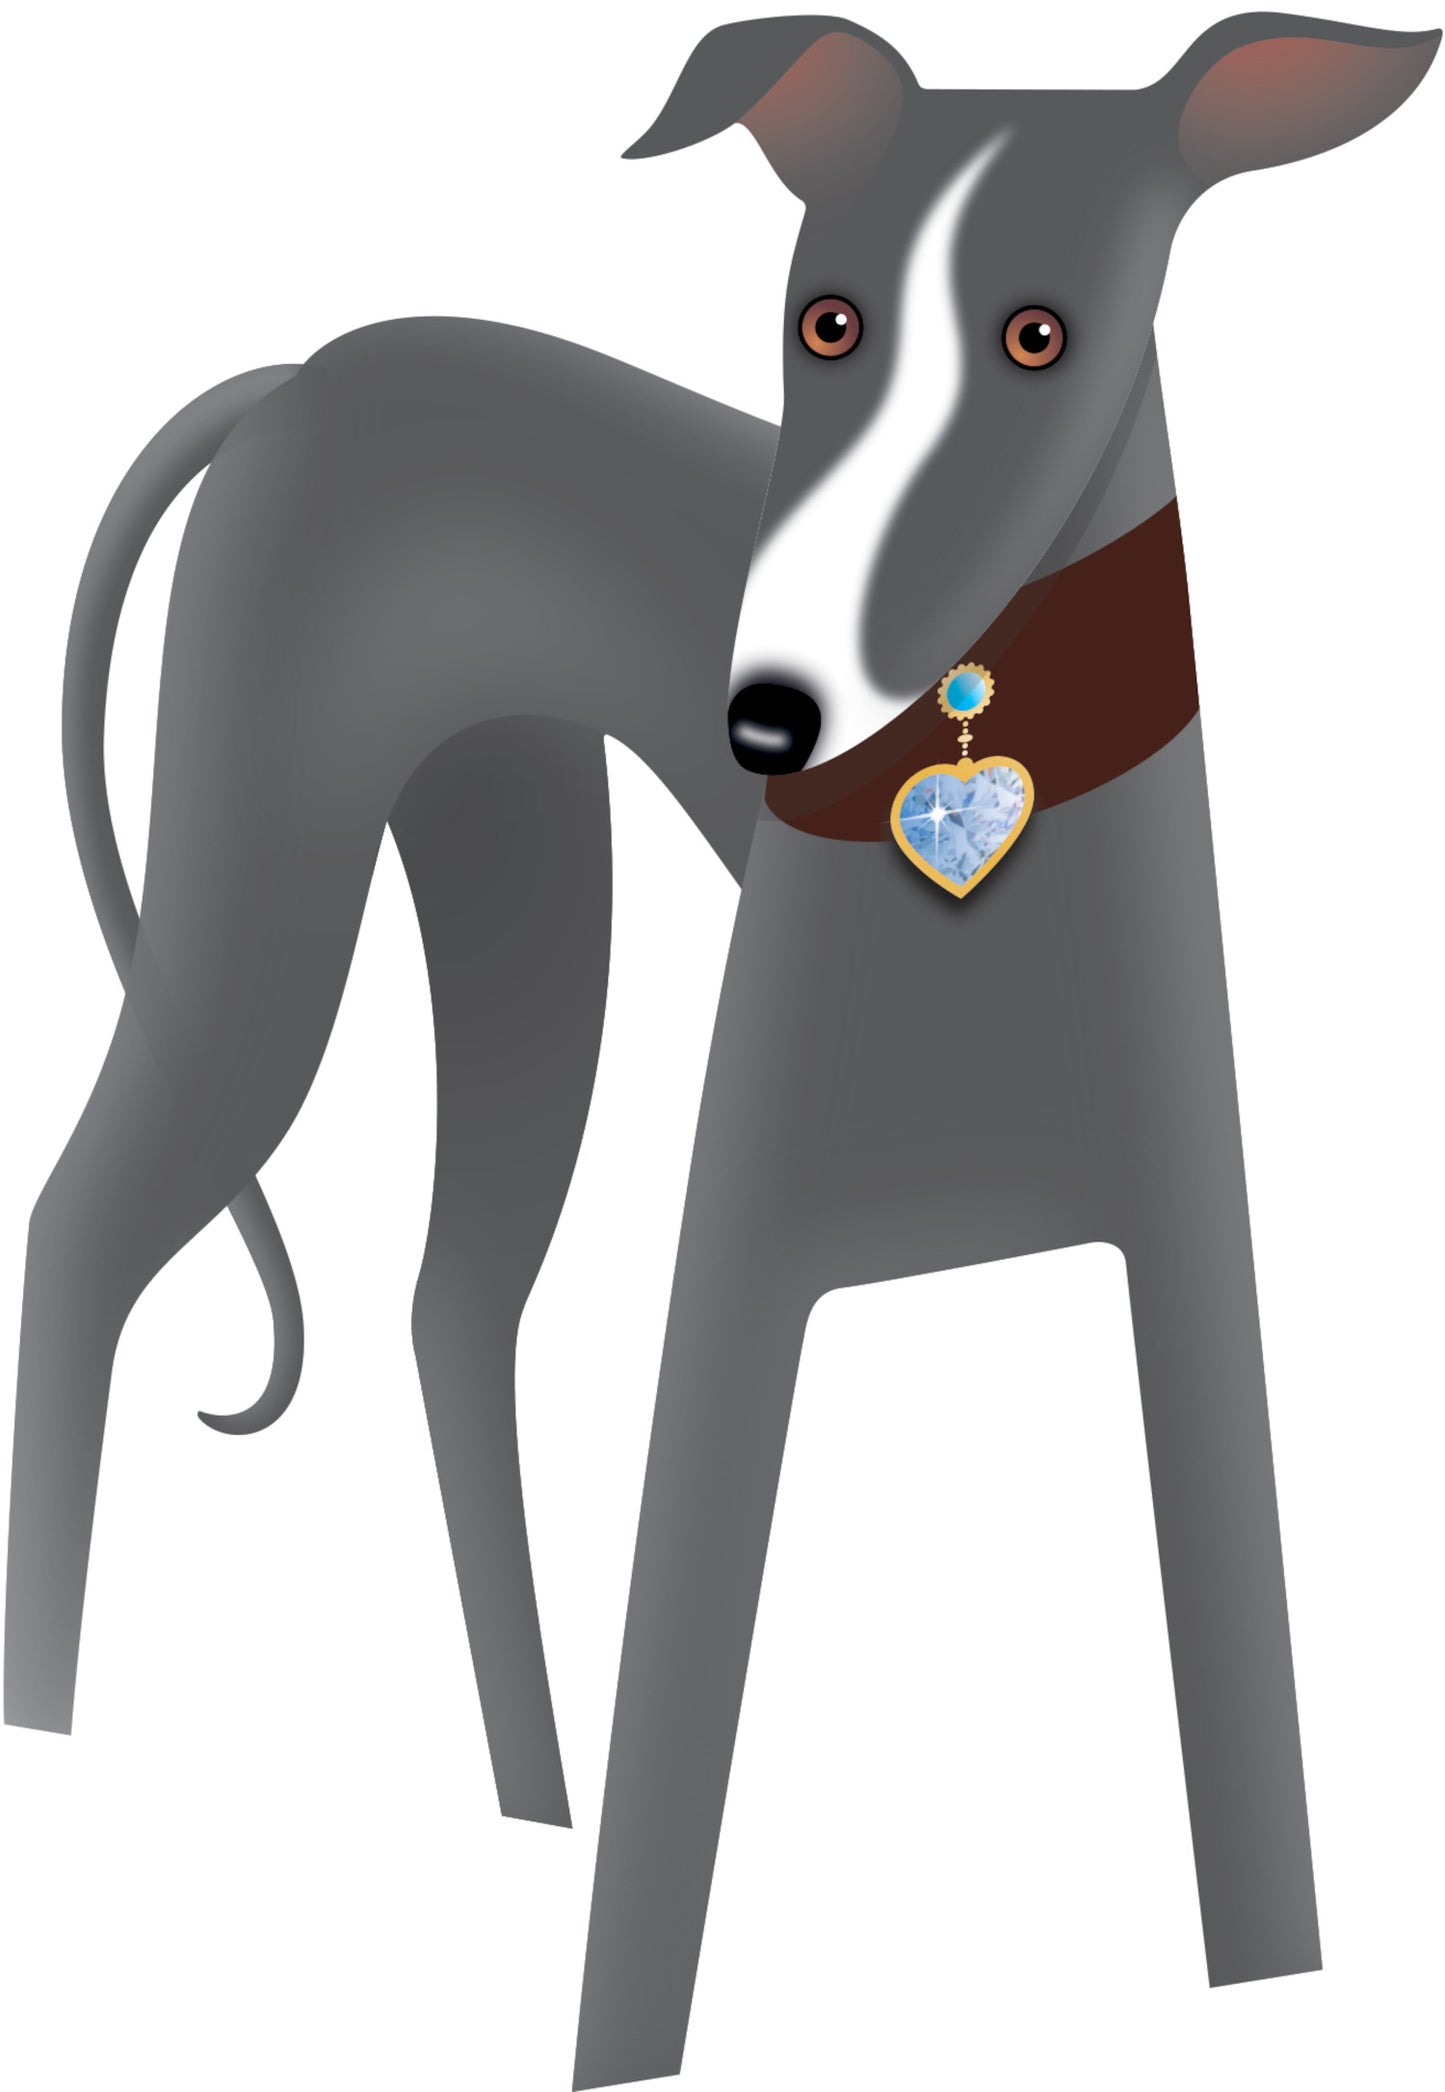 Shadow The Greyhound 3D Special Delivery Animal Greeting Card